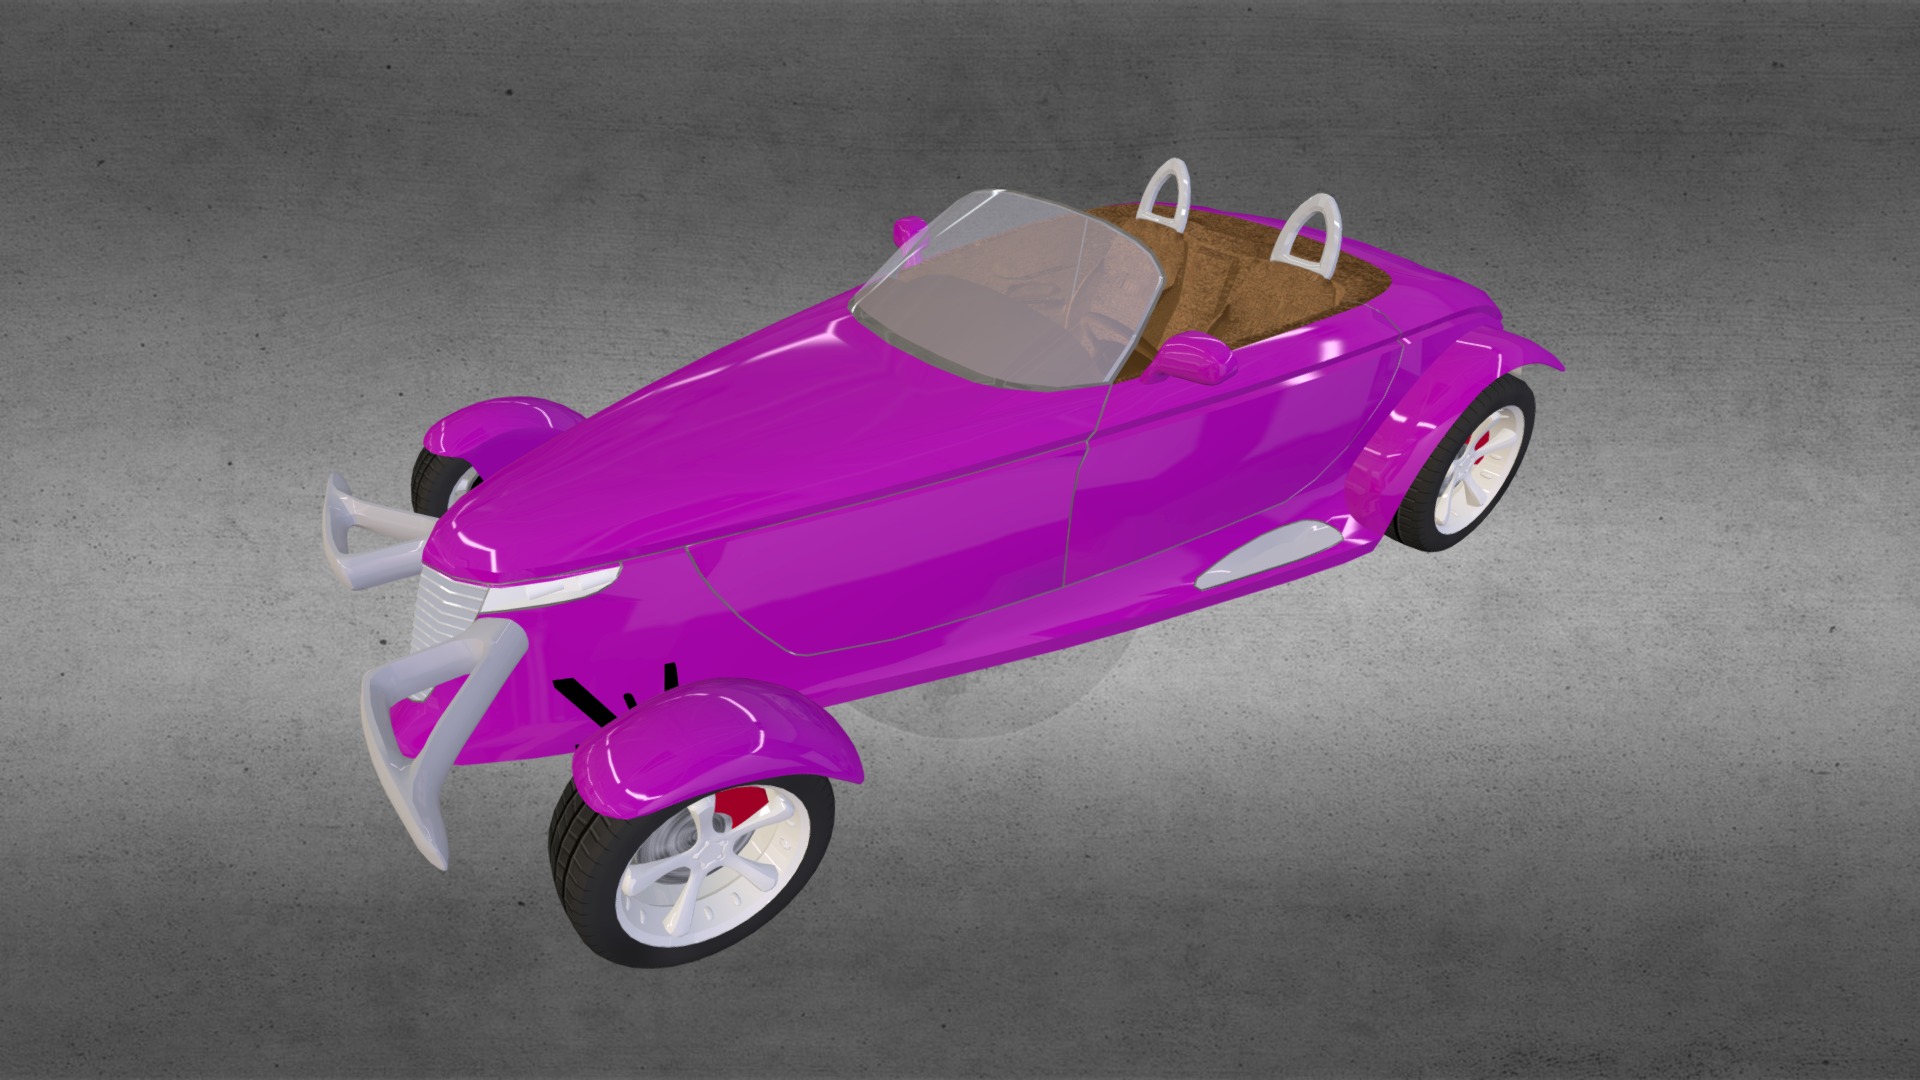 3D model Plymouth Prowler - This is a 3D model of the Plymouth Prowler. The 3D model is about a pink and purple toy car.